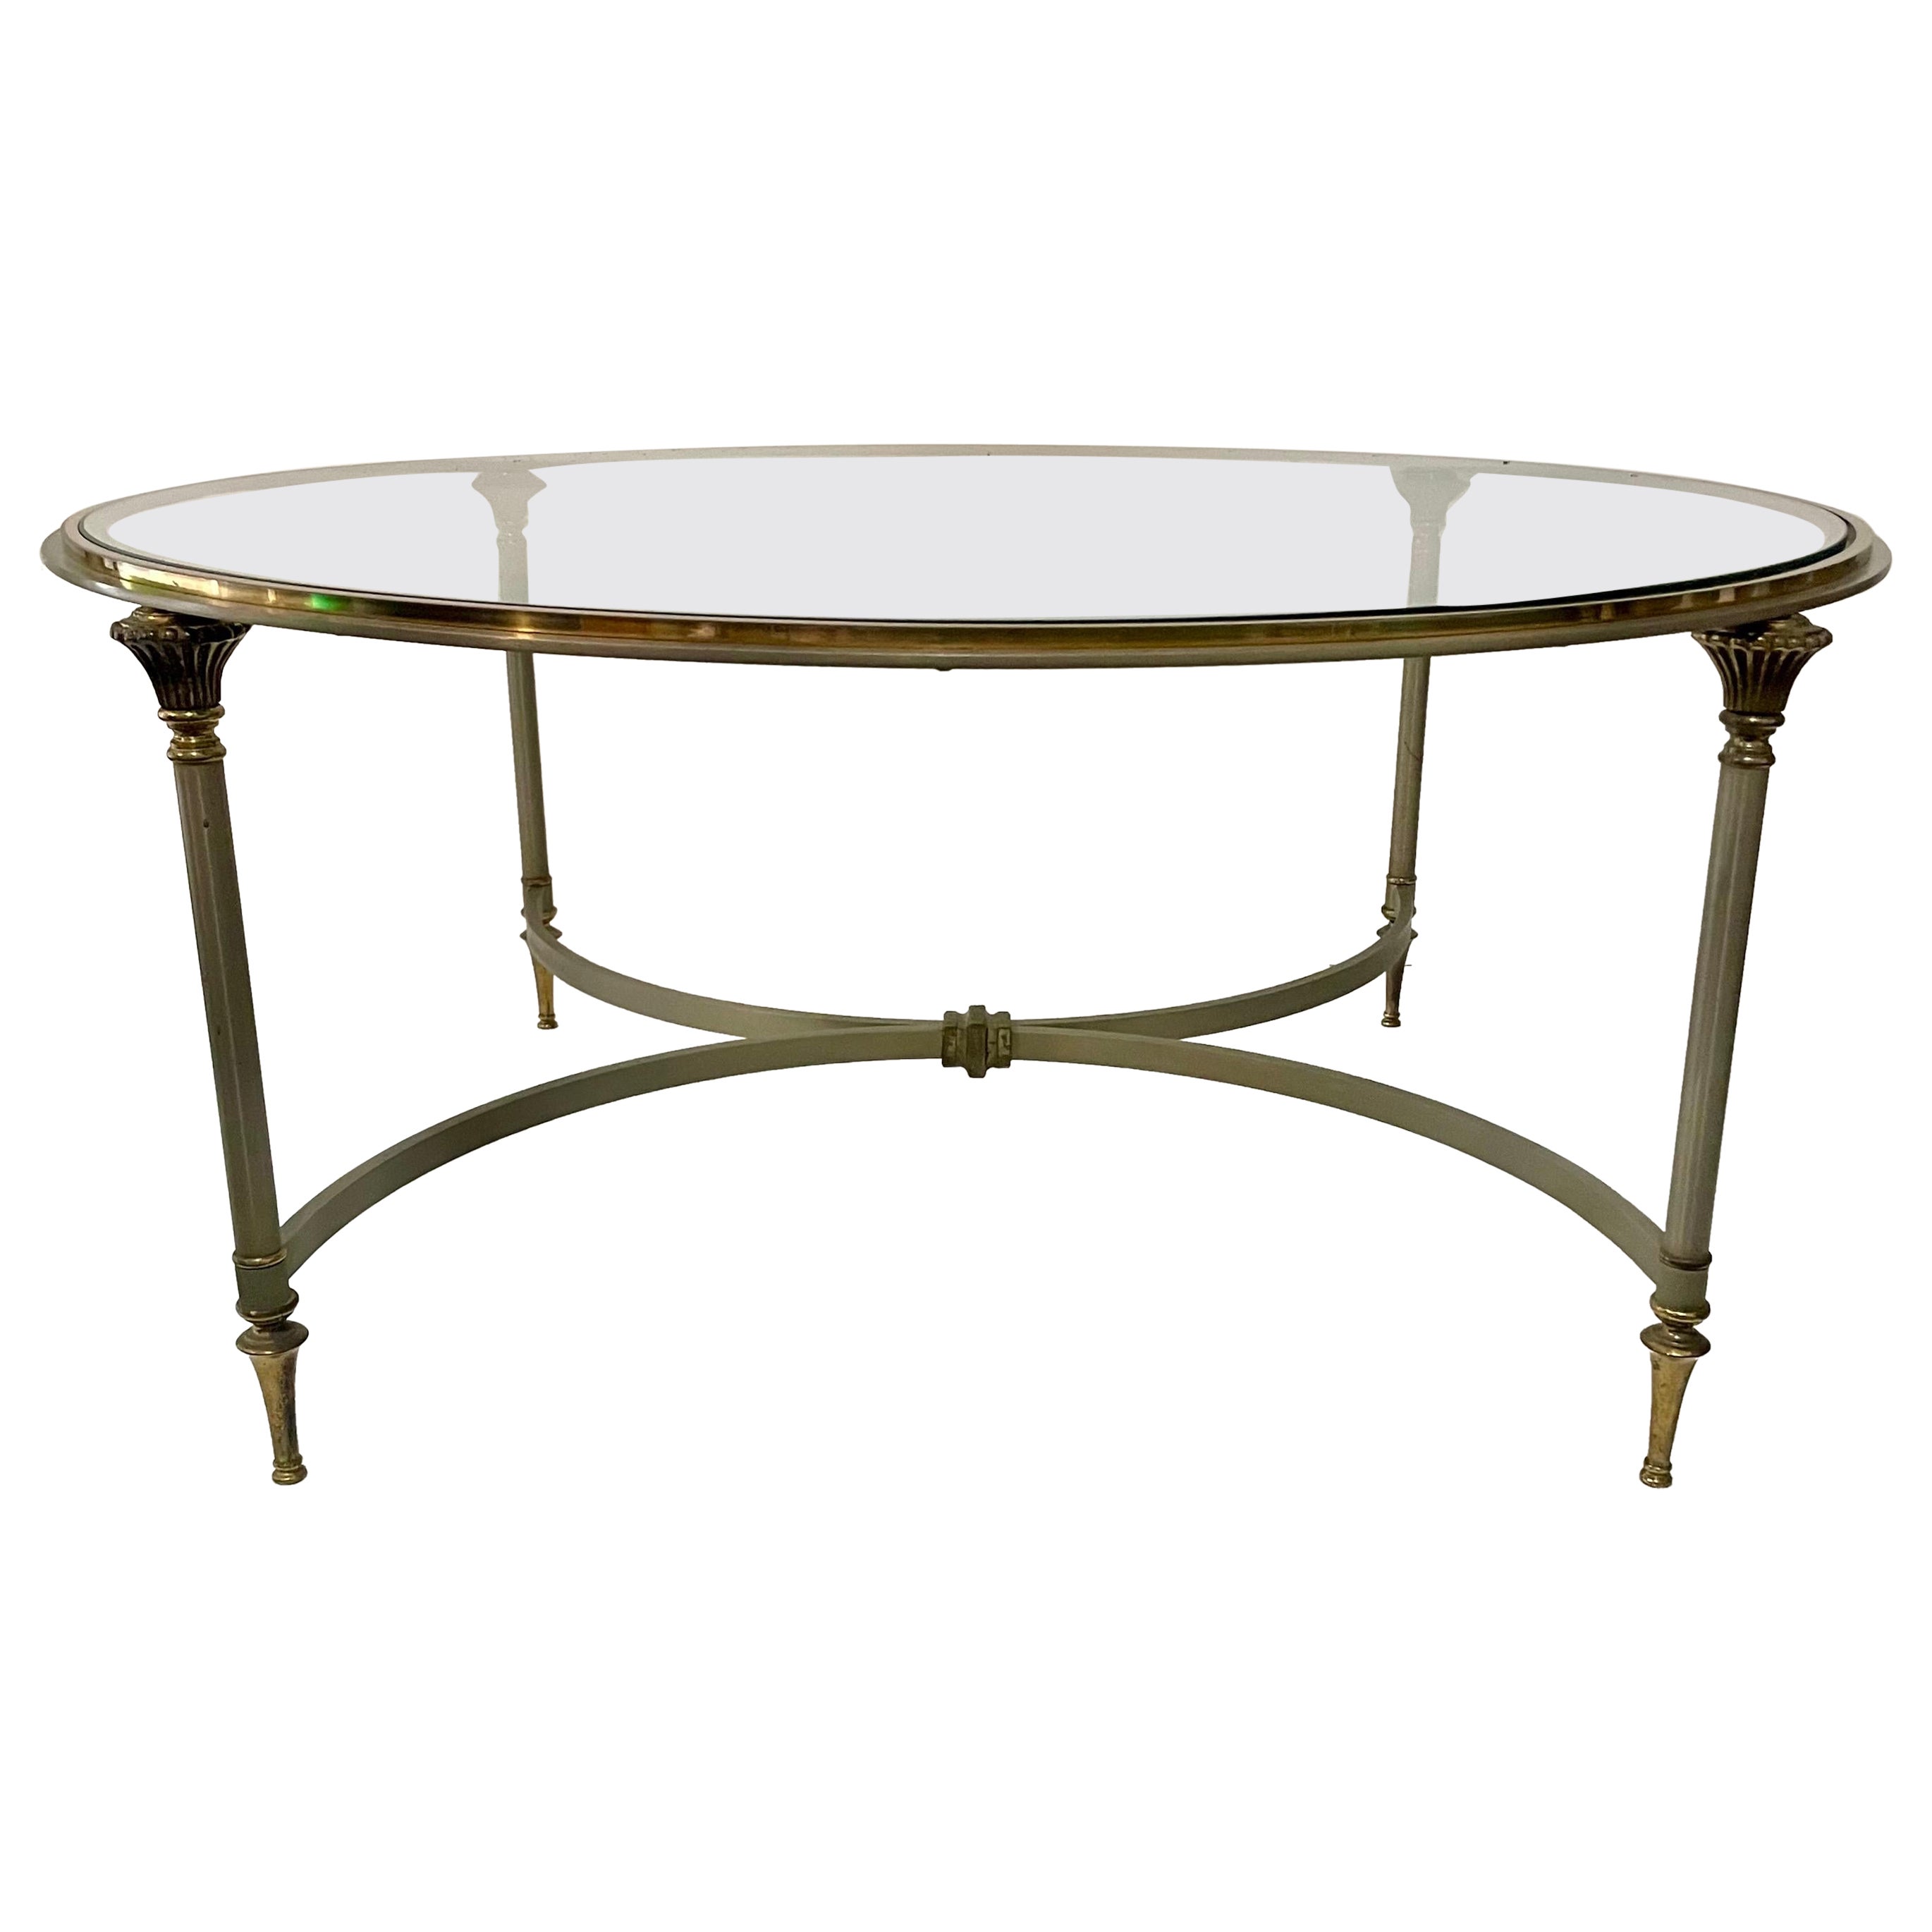  Neoclassical Maison Jansen Style Steel And Brass Coffee Table